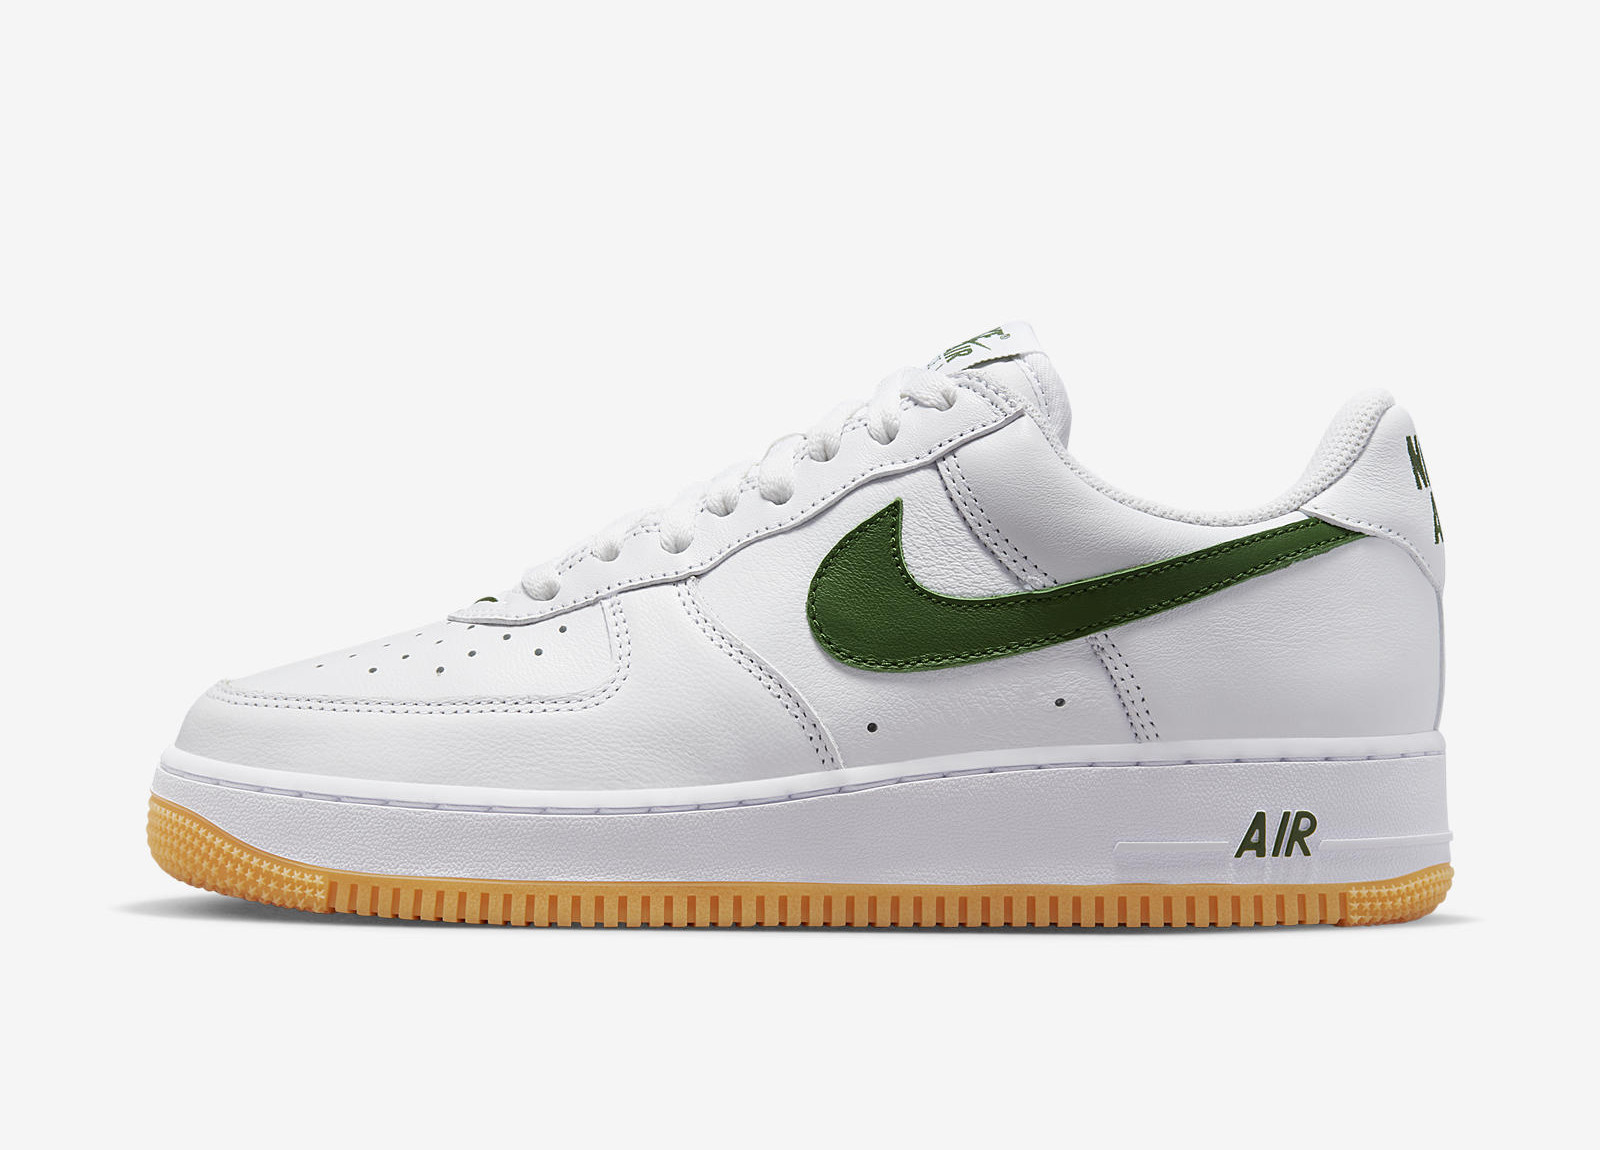 Nike Air Force 1 Low
Color of the Month
Forest Green